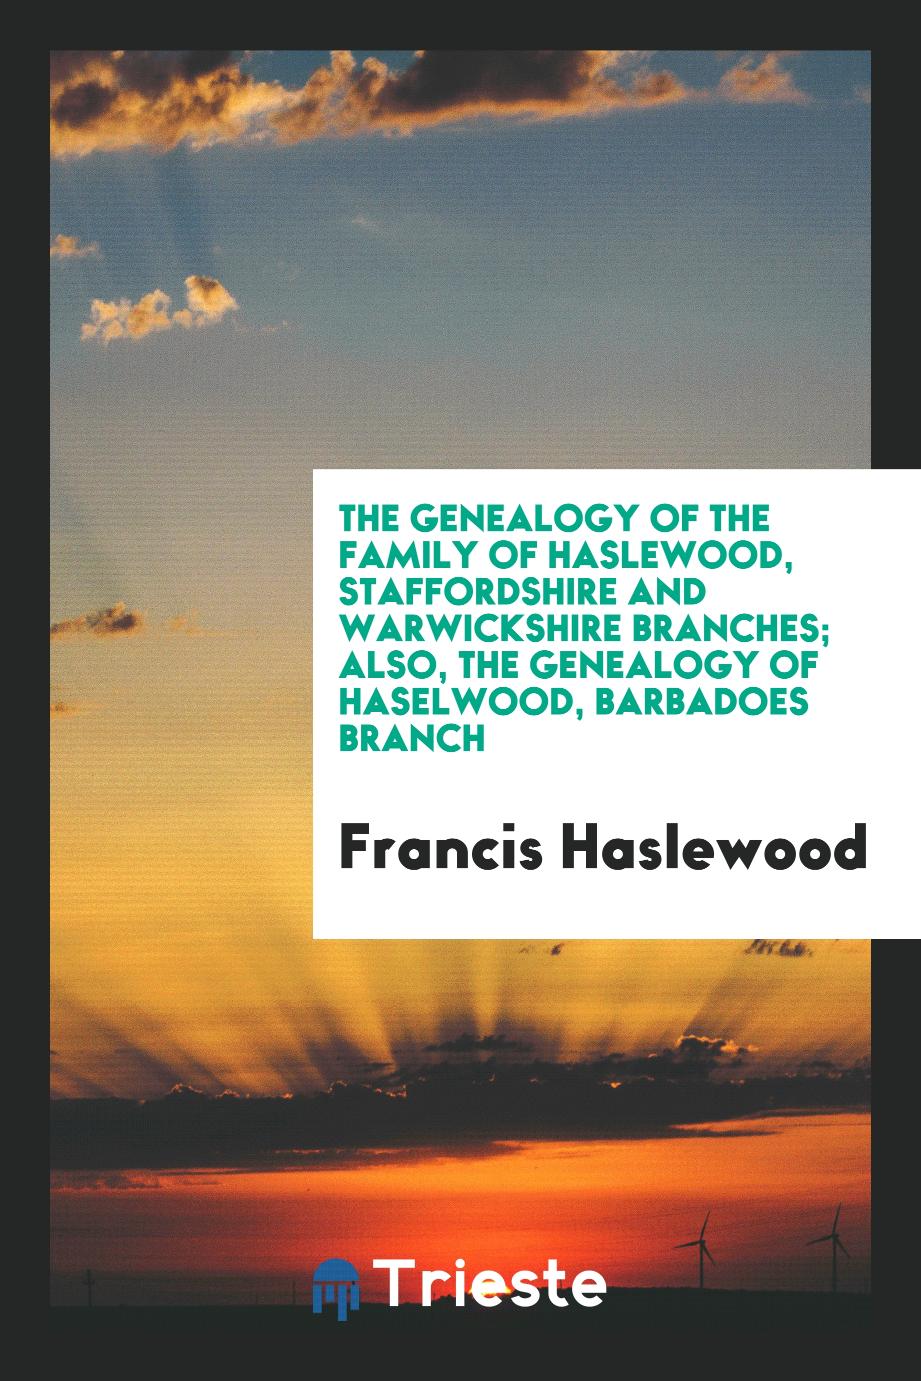 The genealogy of the family of Haslewood, Staffordshire and Warwickshire branches; also, the genealogy of Haselwood, barbadoes branch